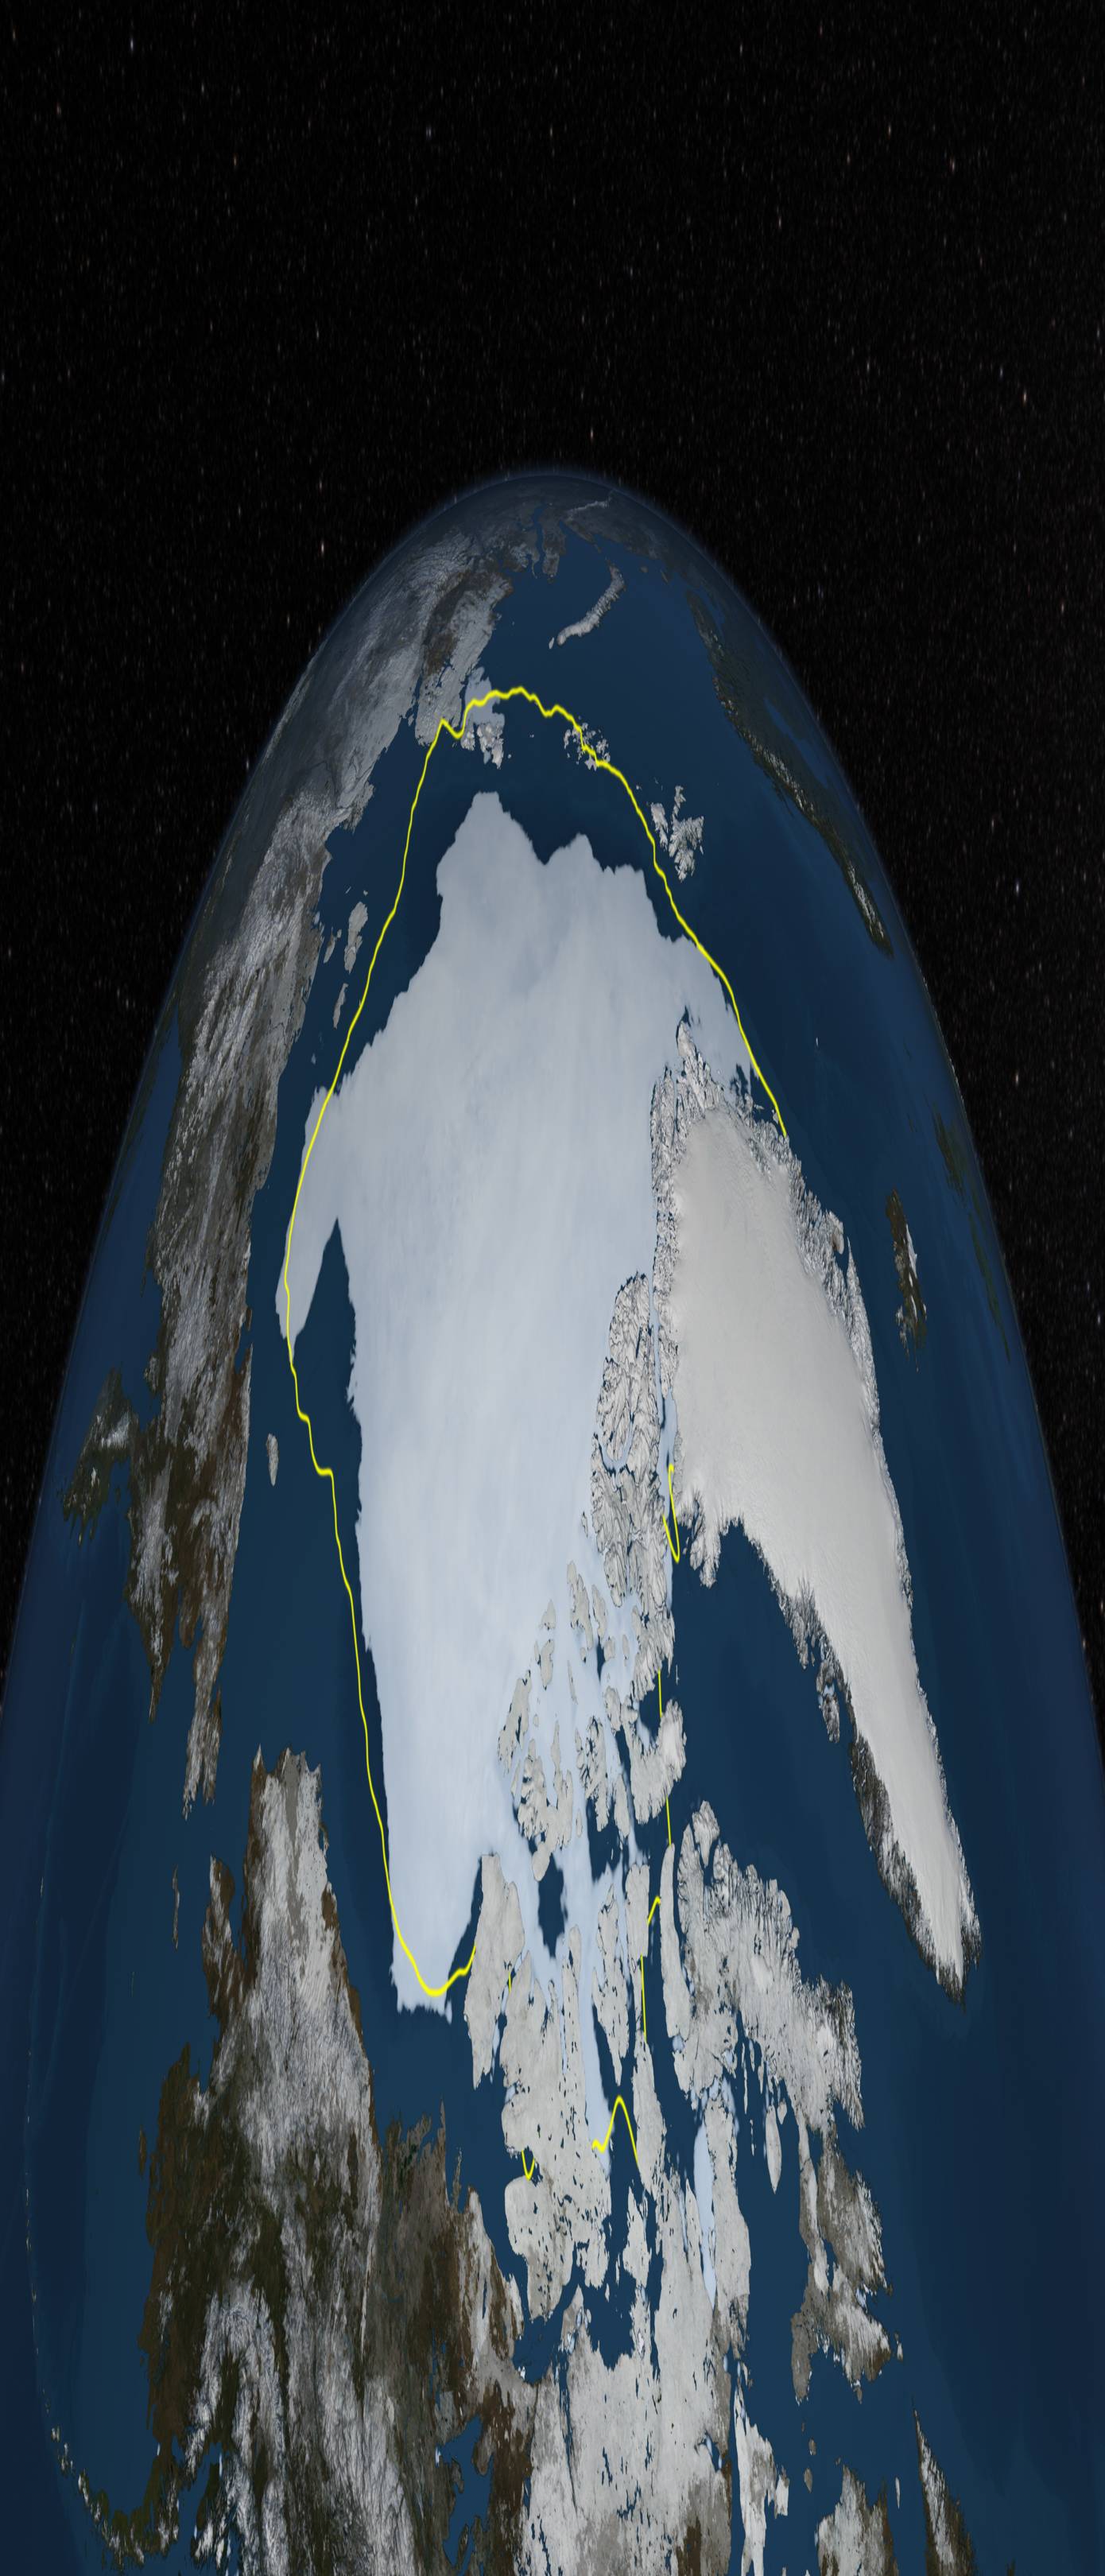 Depiction of Arctic sea ice on Sept. 12, 2013, the day before NSIDC estimated sea ice extent hit its annual minimum, with a line showing the 30-year average minimum extent in yellow. The data was provided by the Japan Aerospace Exploration Agency from their GCOM-W1 satellite's AMSR2 instrument. <i><b>Image Credit: NASA Goddard's Scientific Visualization Studio/Cindy Starr</b></i>